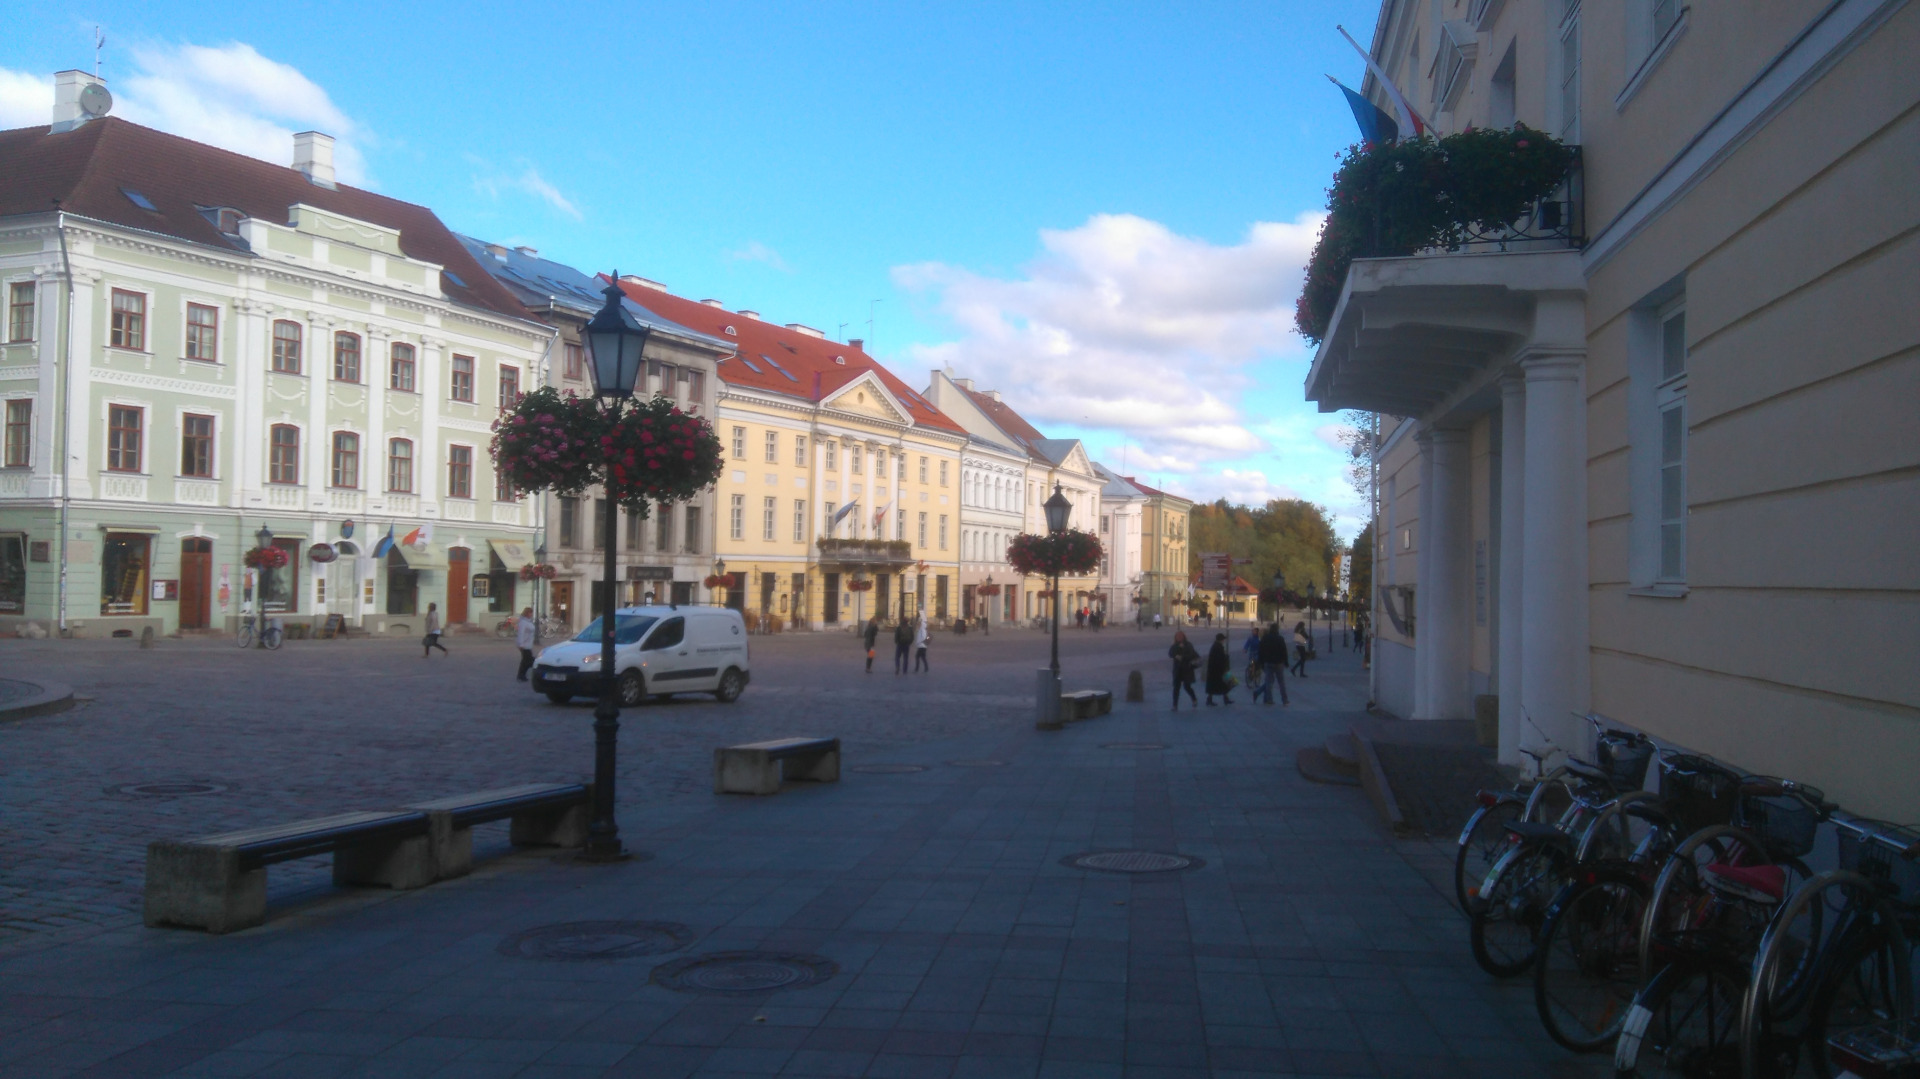 Tartu Raekoja Square from the end of the University rephoto